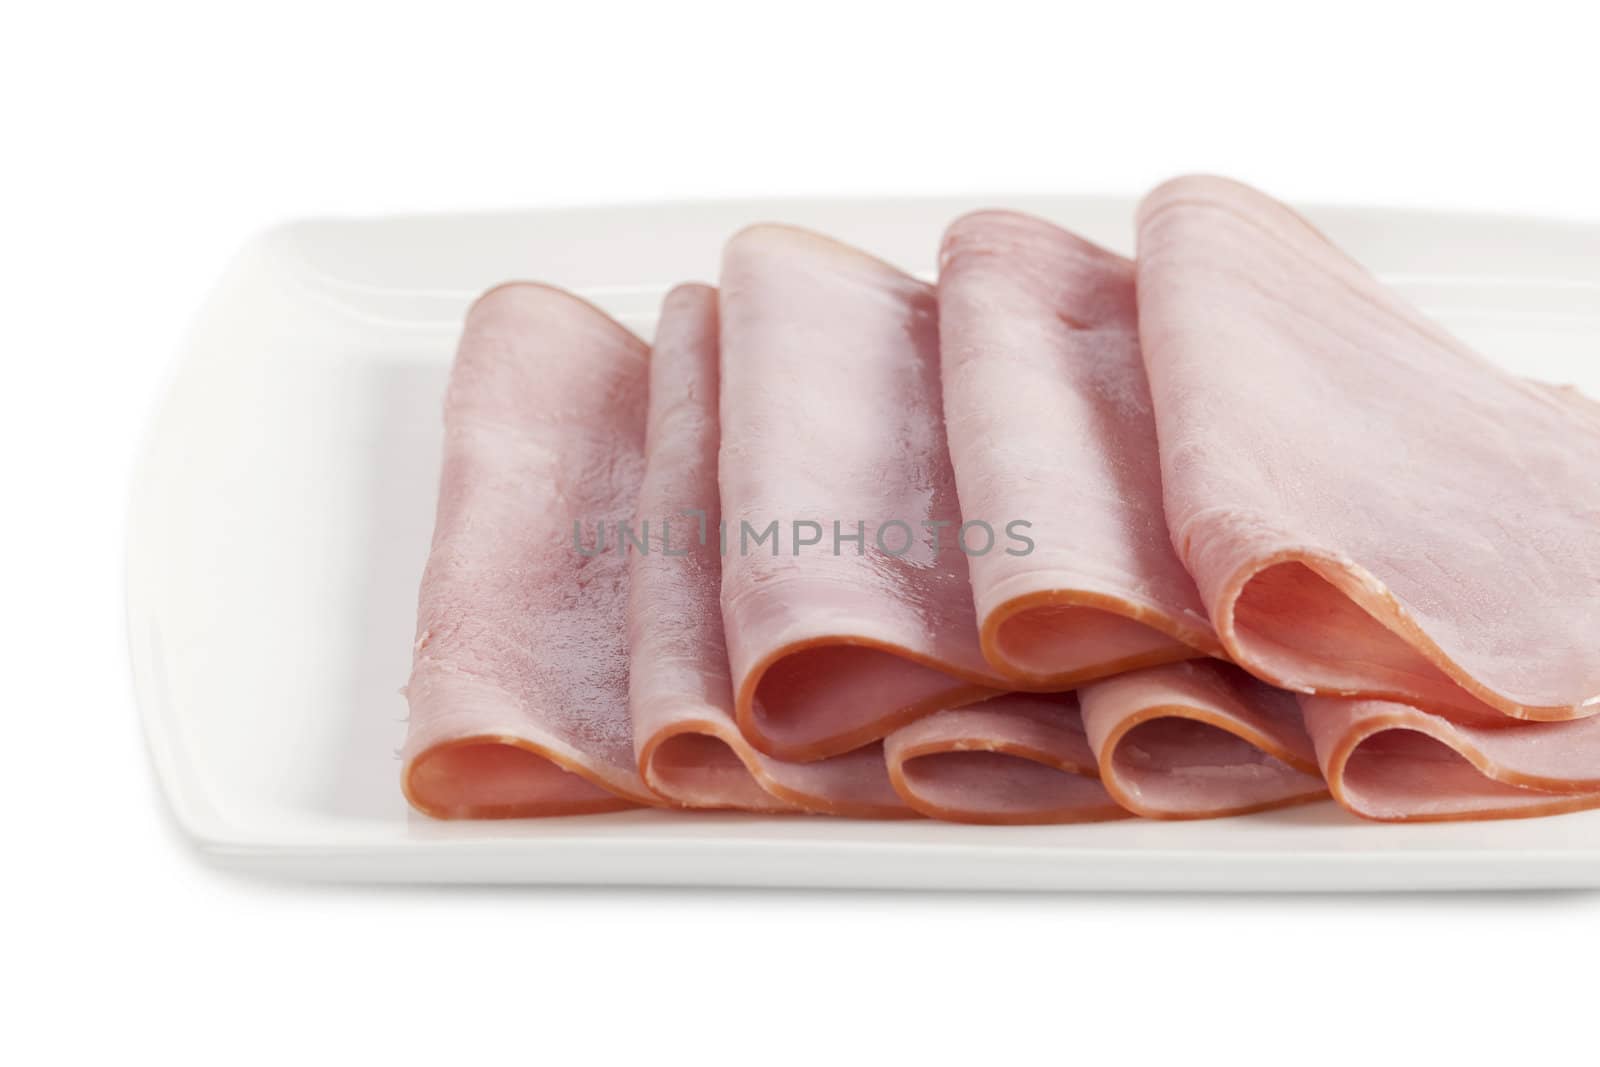 Close up image of slices of ham on white plate against white background